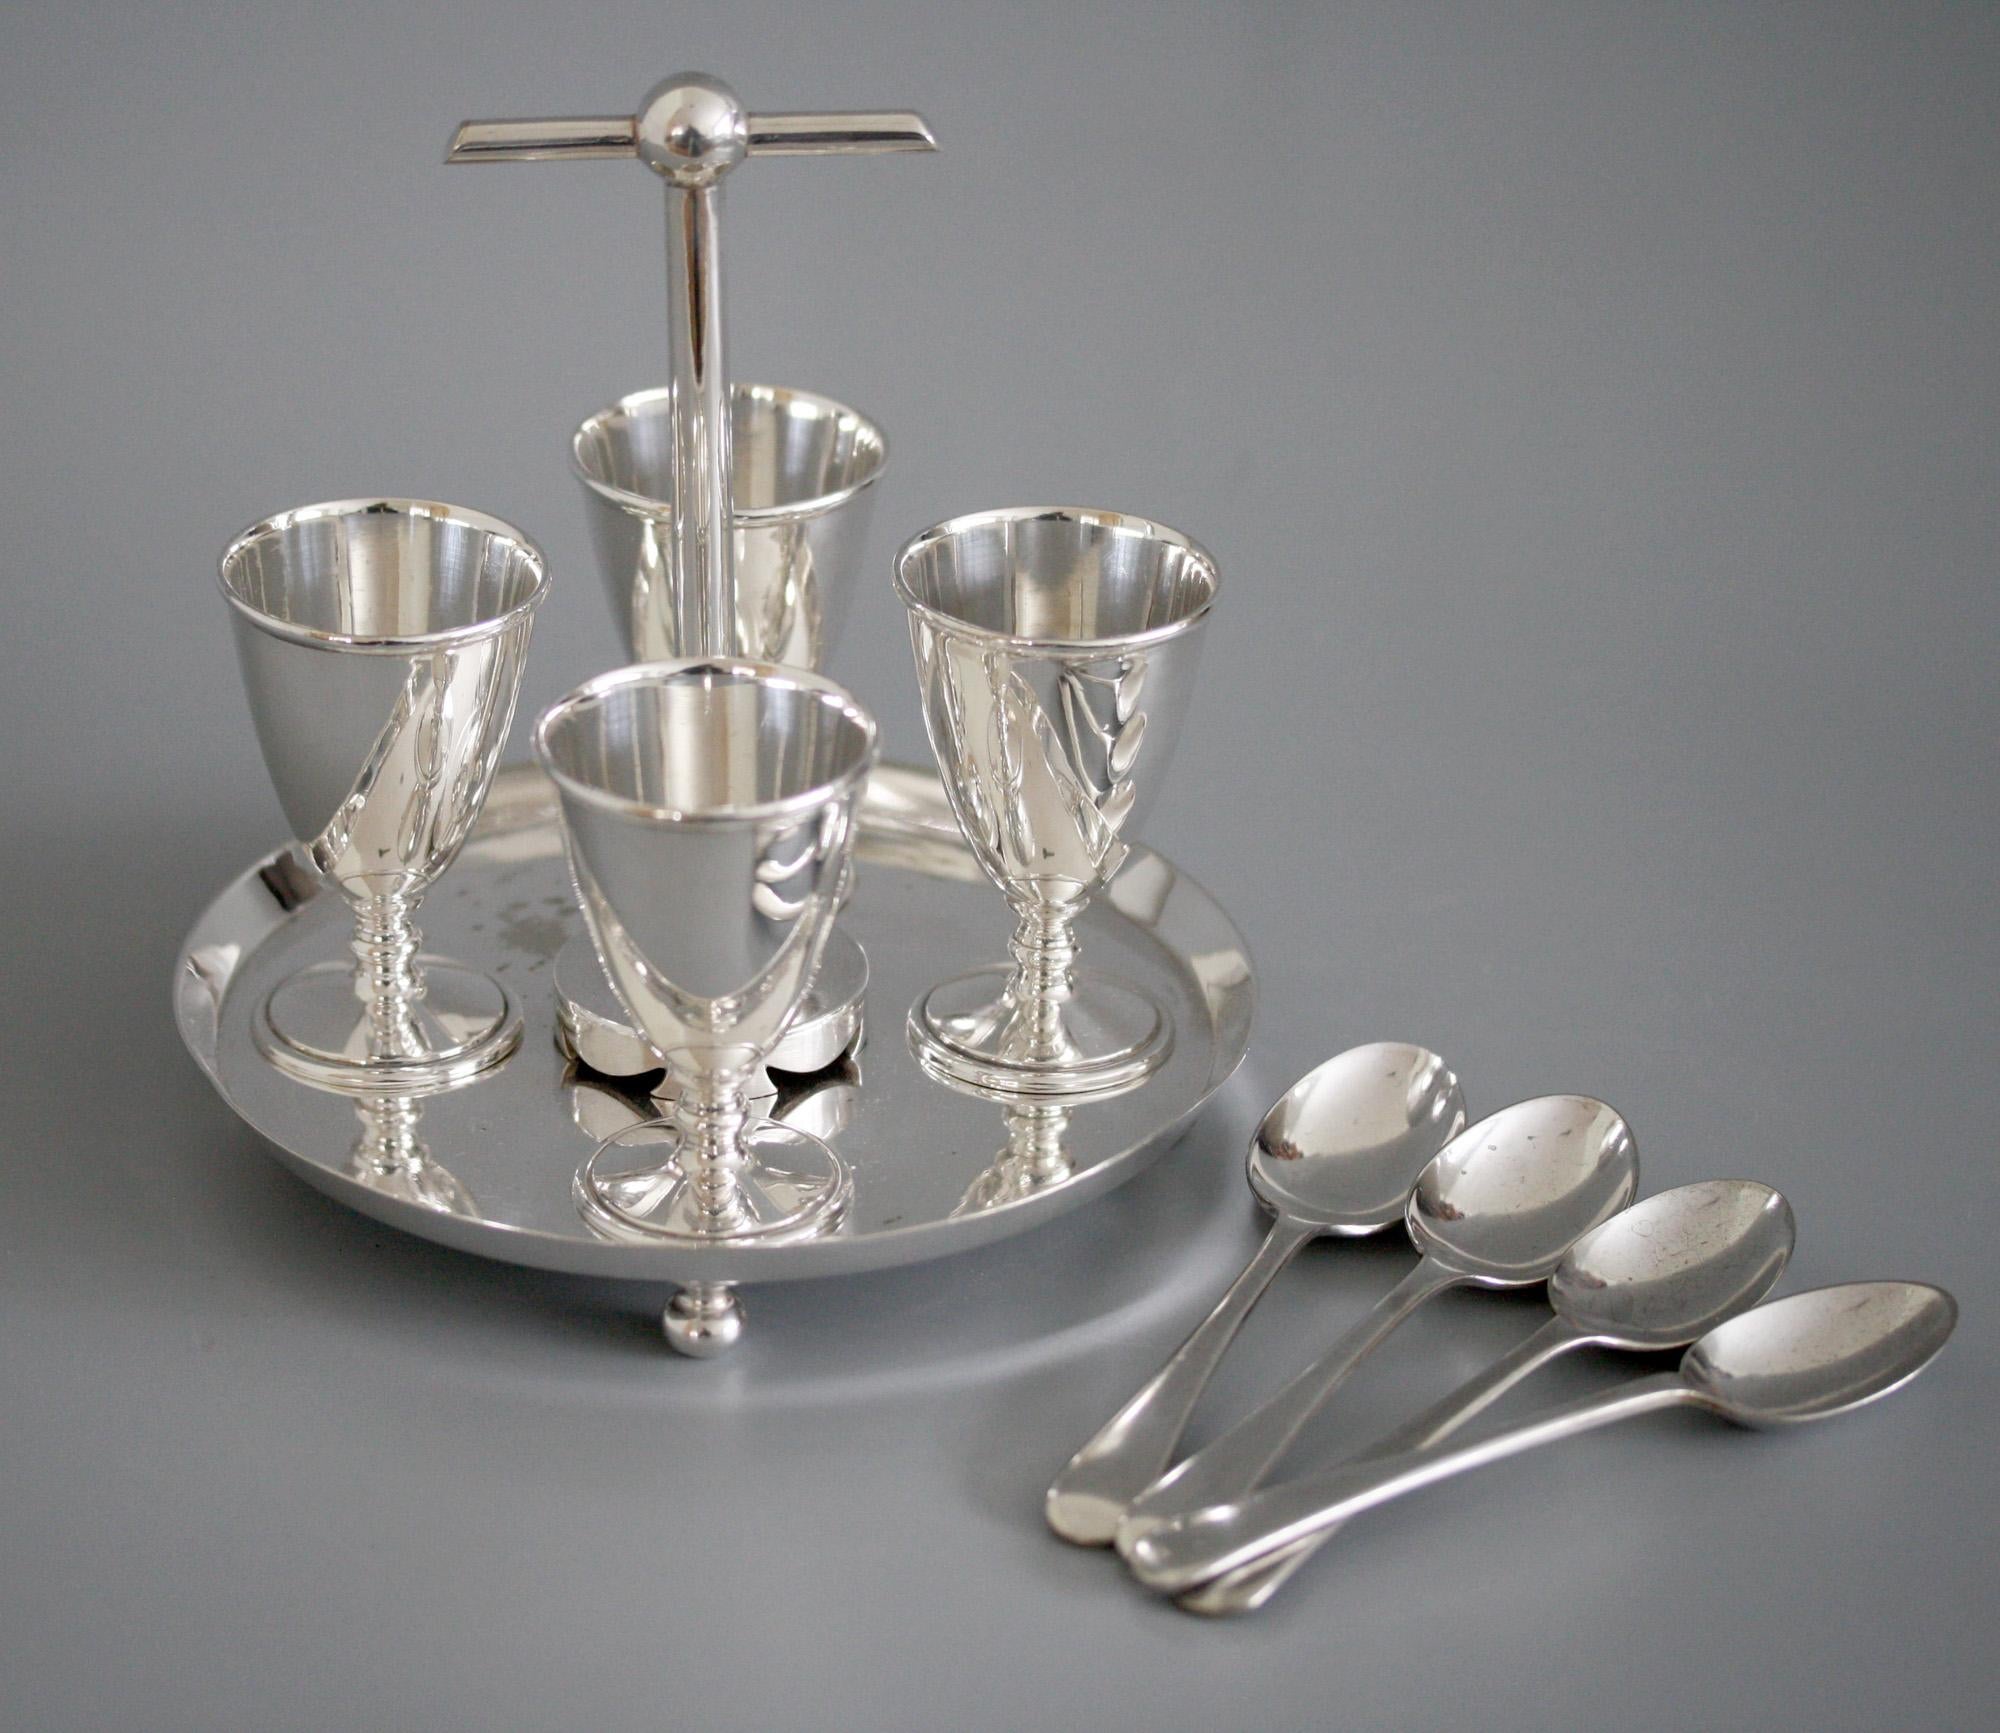 Hukin & Heath Silver Plated Four Eggcup Stand Designed by Christopher Dresser 8